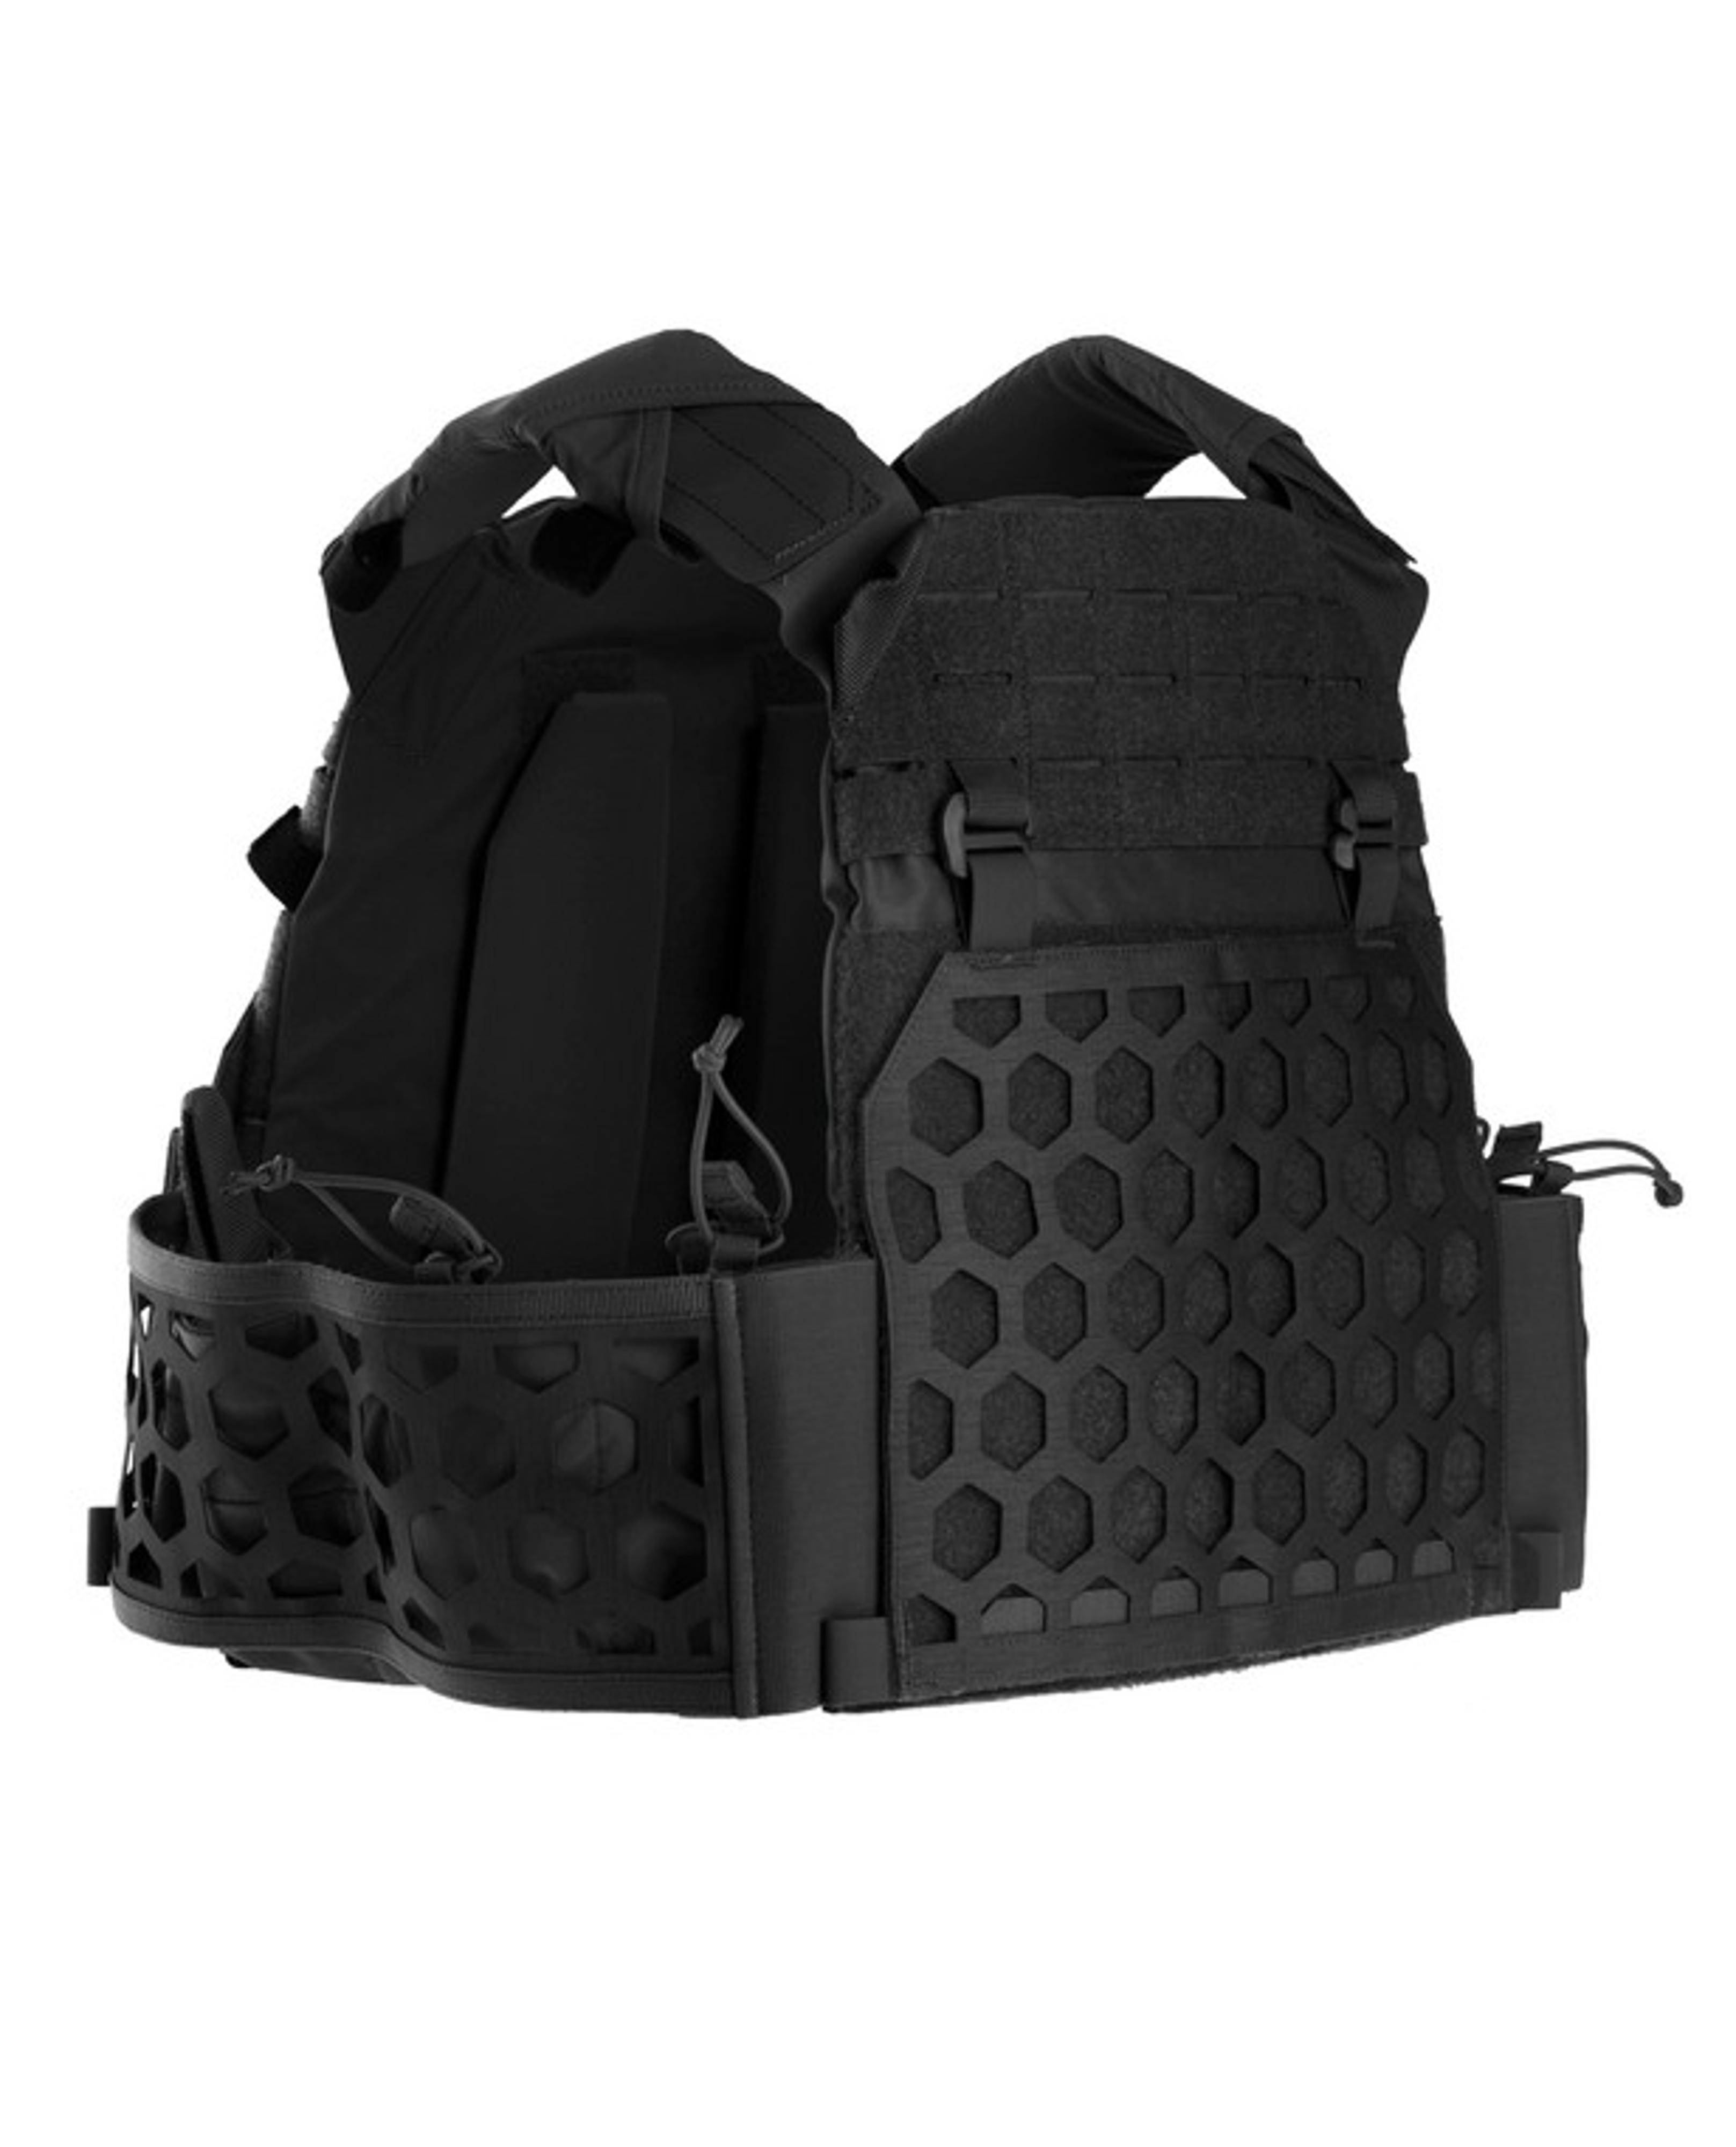 All Mission Plate Carrier : The Shooting Edge